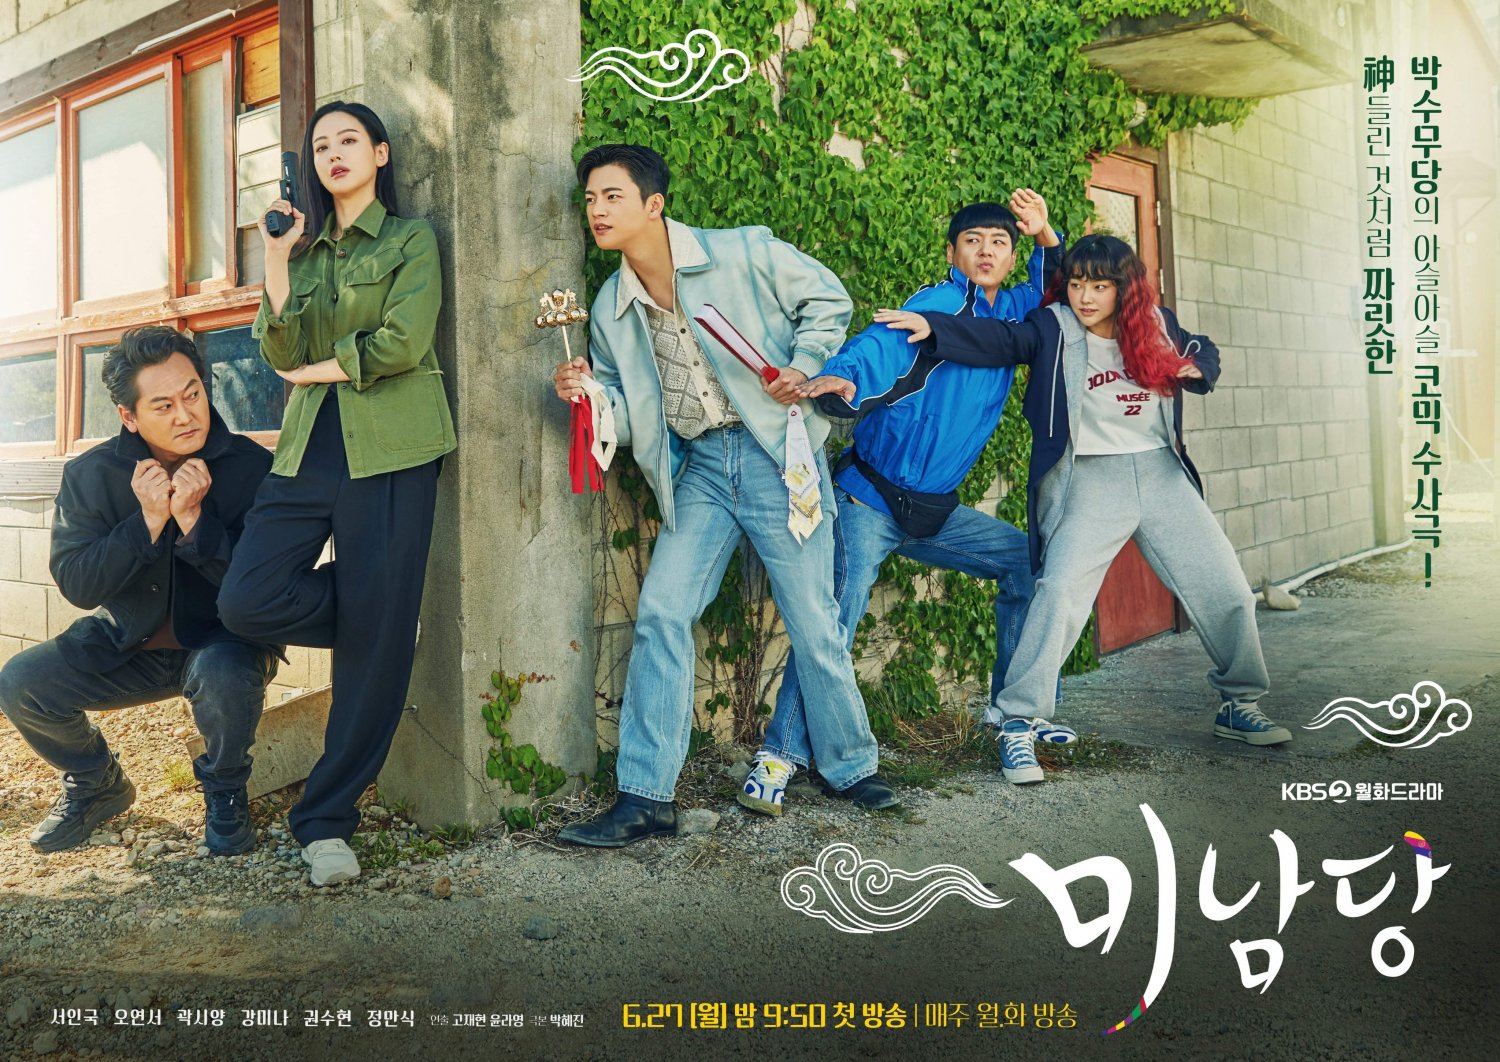 Café Minamdang Episode 1 Review: A Stylish, Exciting, and Entertaining K-drama Streaming on Netflix